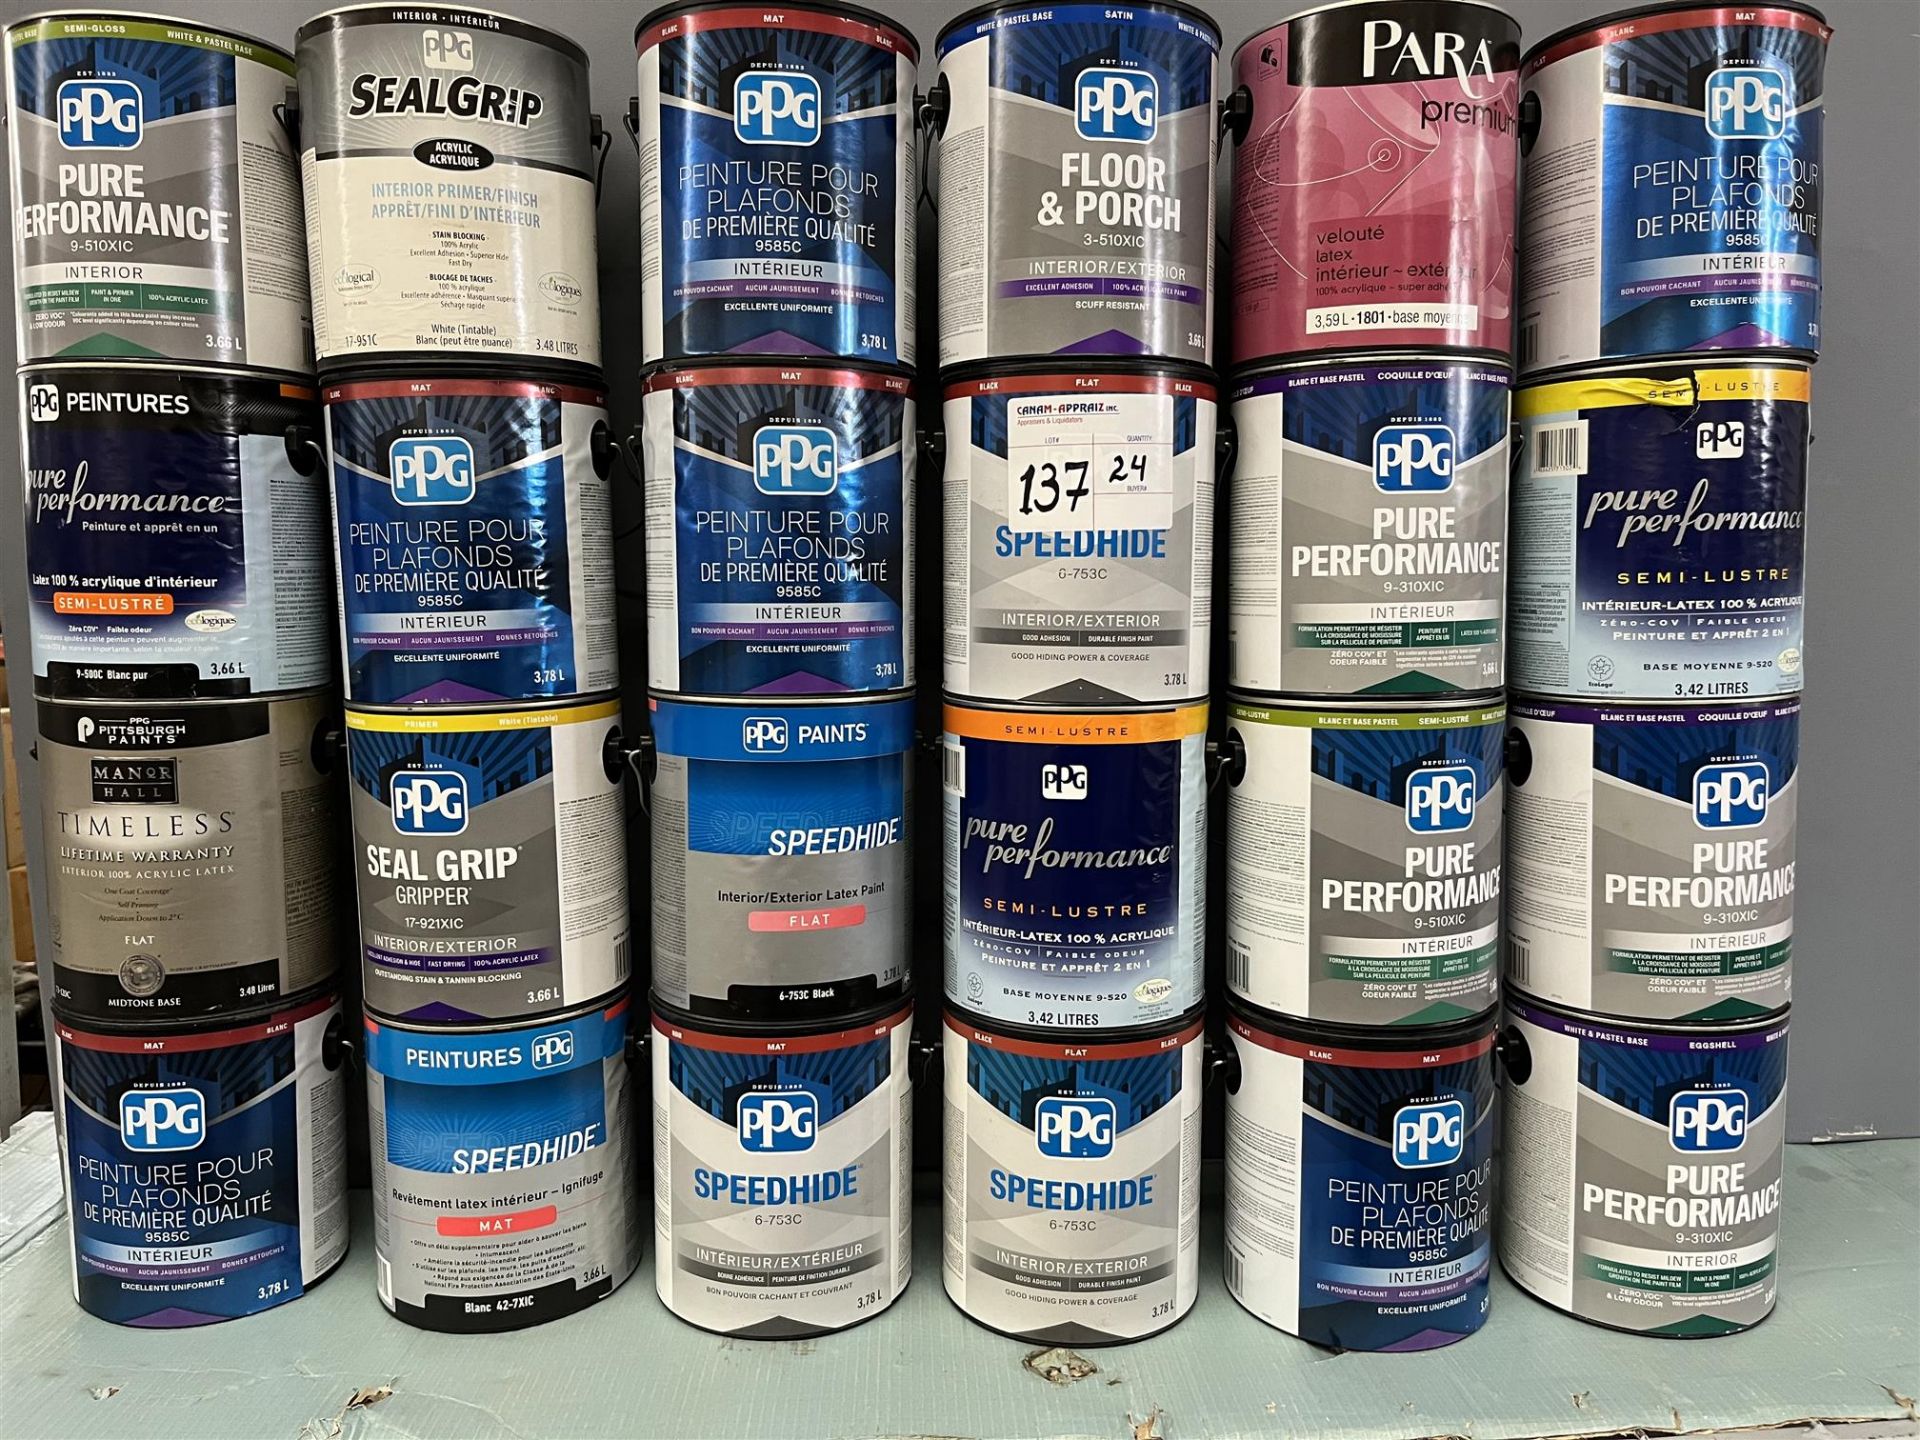 Lot of Assorted Paint & Wood Finish - See Photos for Details - Quantity x24